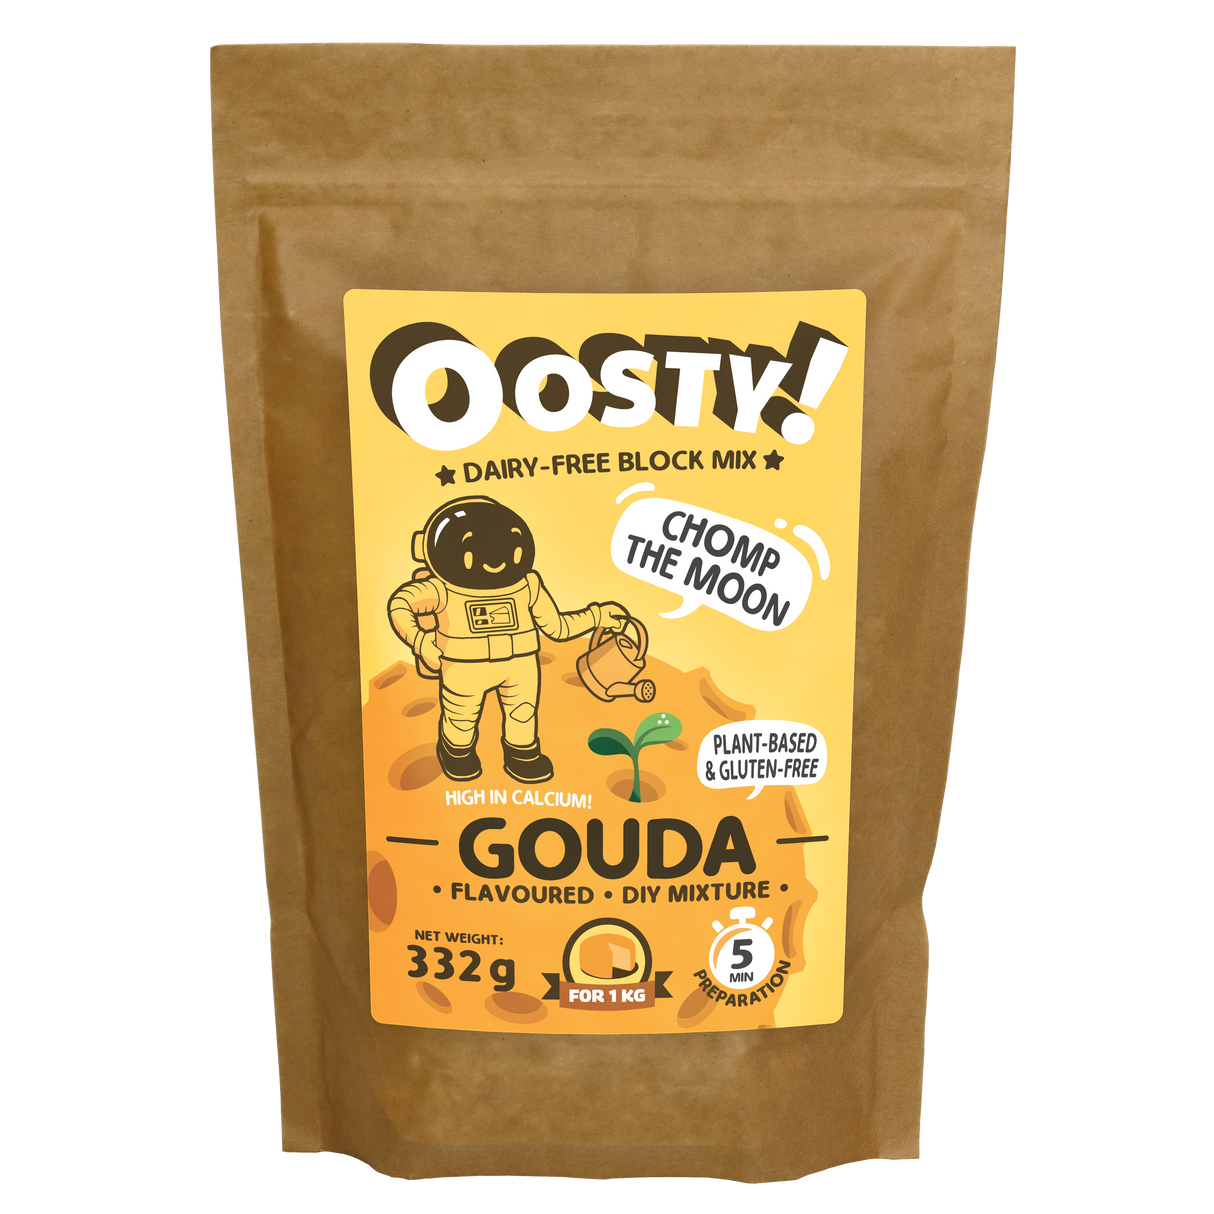 Oosty Gouda flavoured plant-based mixture 332g